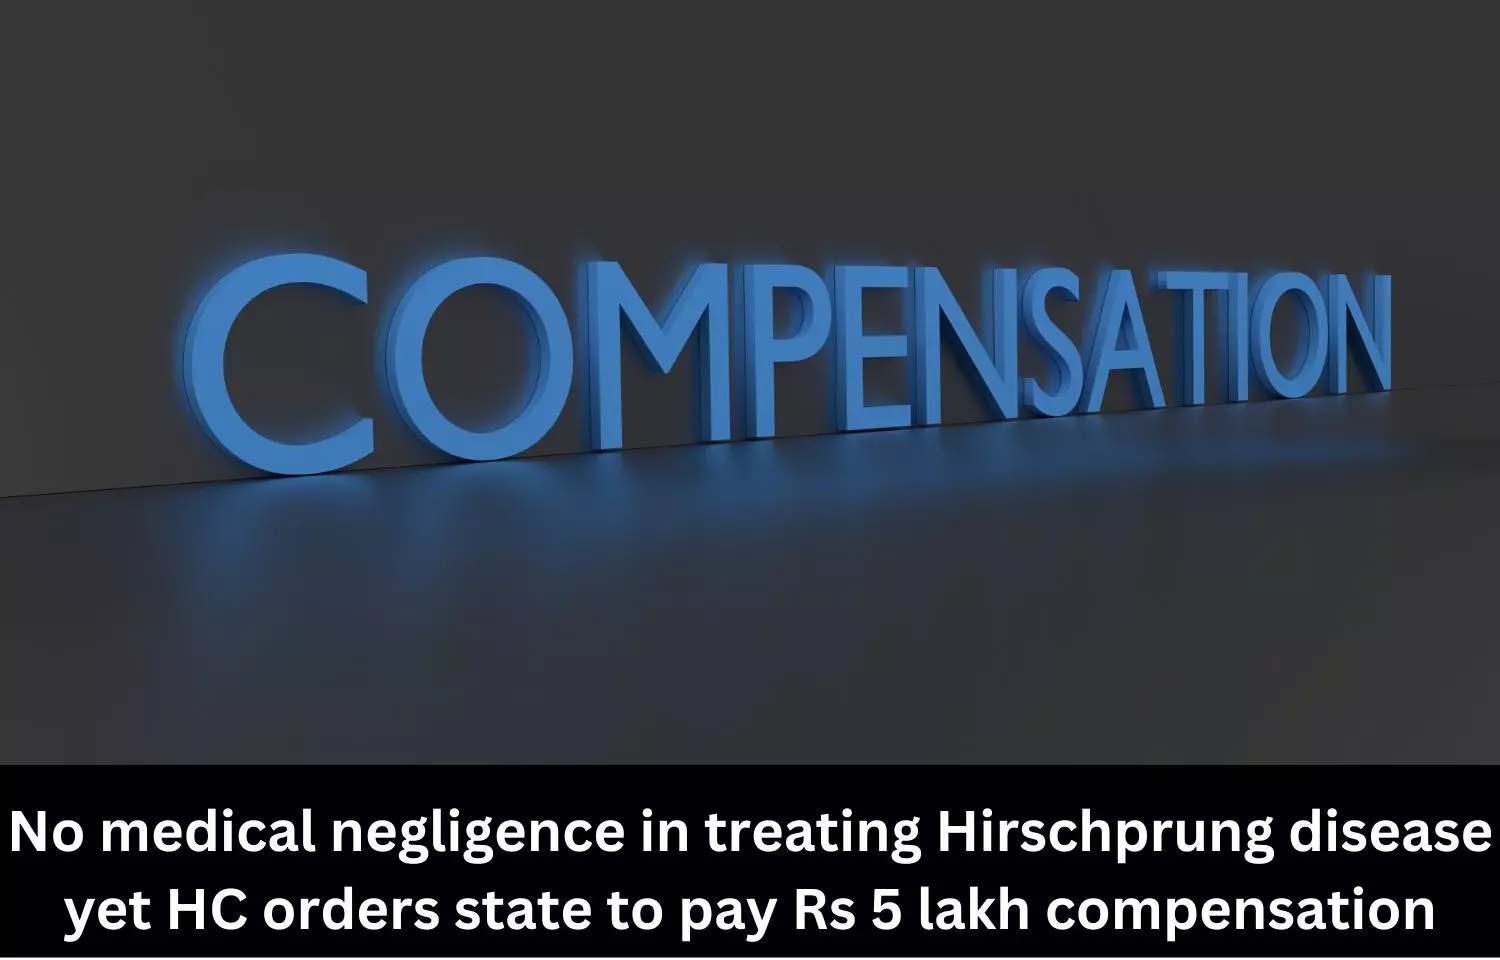 No medical negligence in treating Hirschprung Disease yet HC orders state to pay Rs 5 lakh compensation